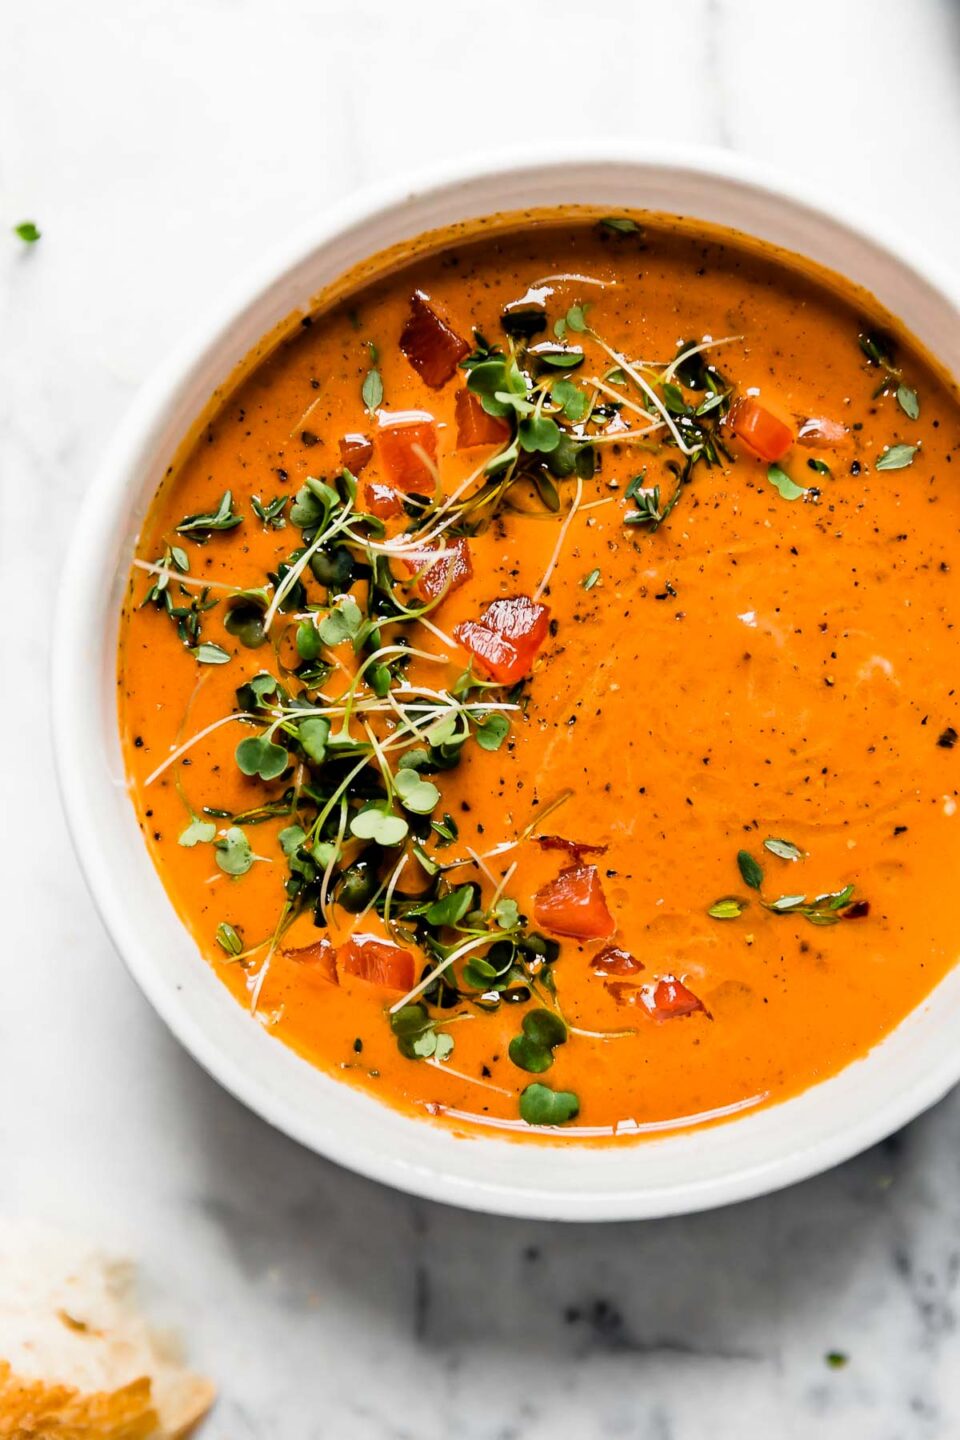 Creamy Roasted Red Pepper soup in a white ceramic bowl, topped with microgreens and cracked black pepper. The bowl is surrounded by some pieces of crusty bread. They are sitting atop a white marble surface.